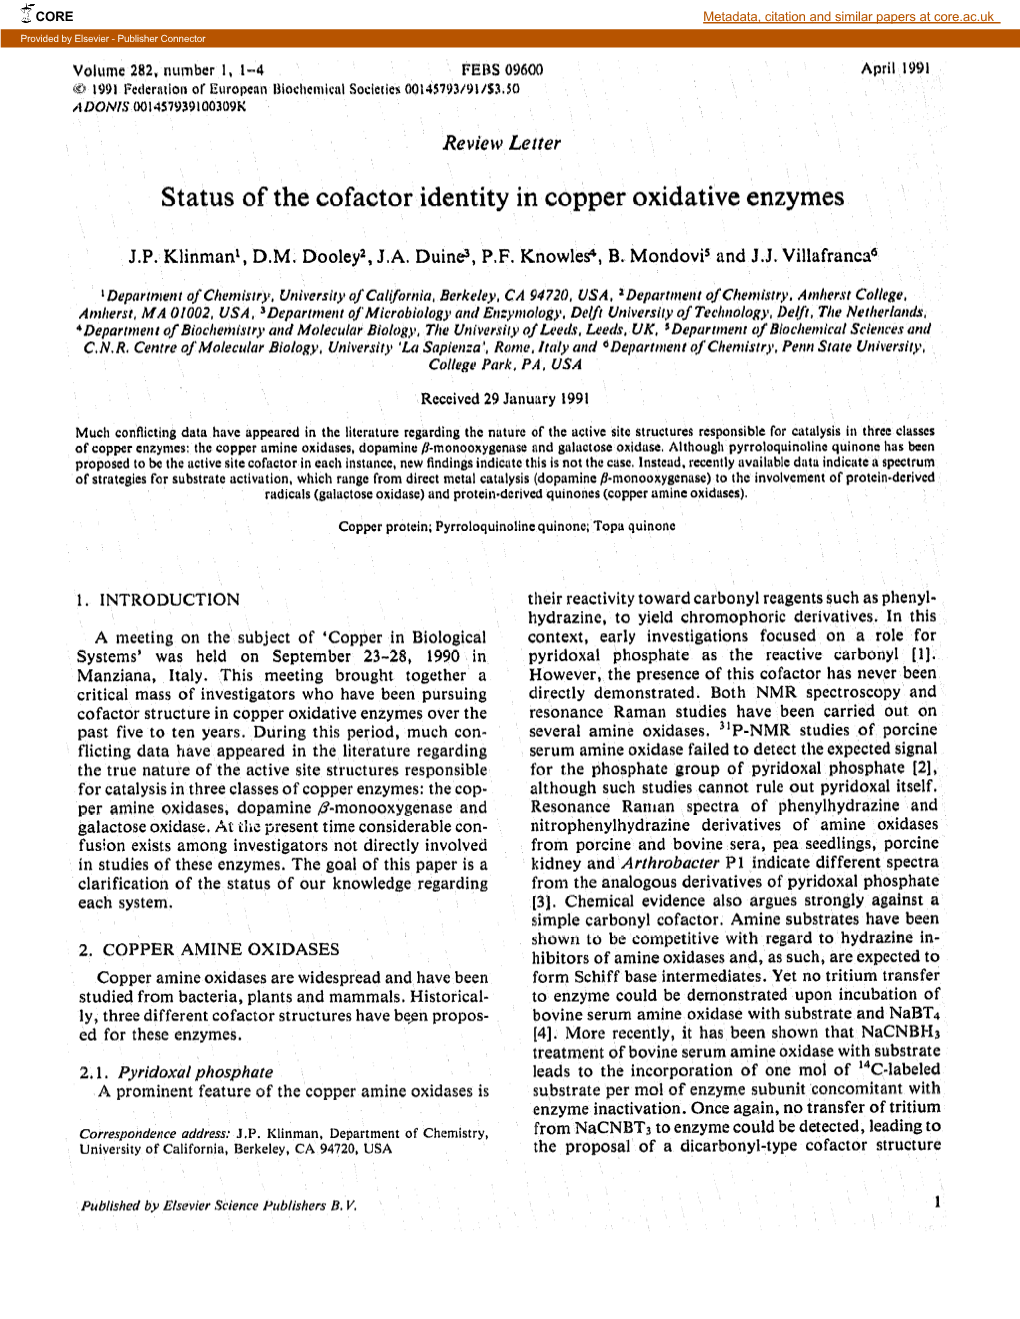 Status of the Cofactor Identity in Copper Oxidative Enzymes